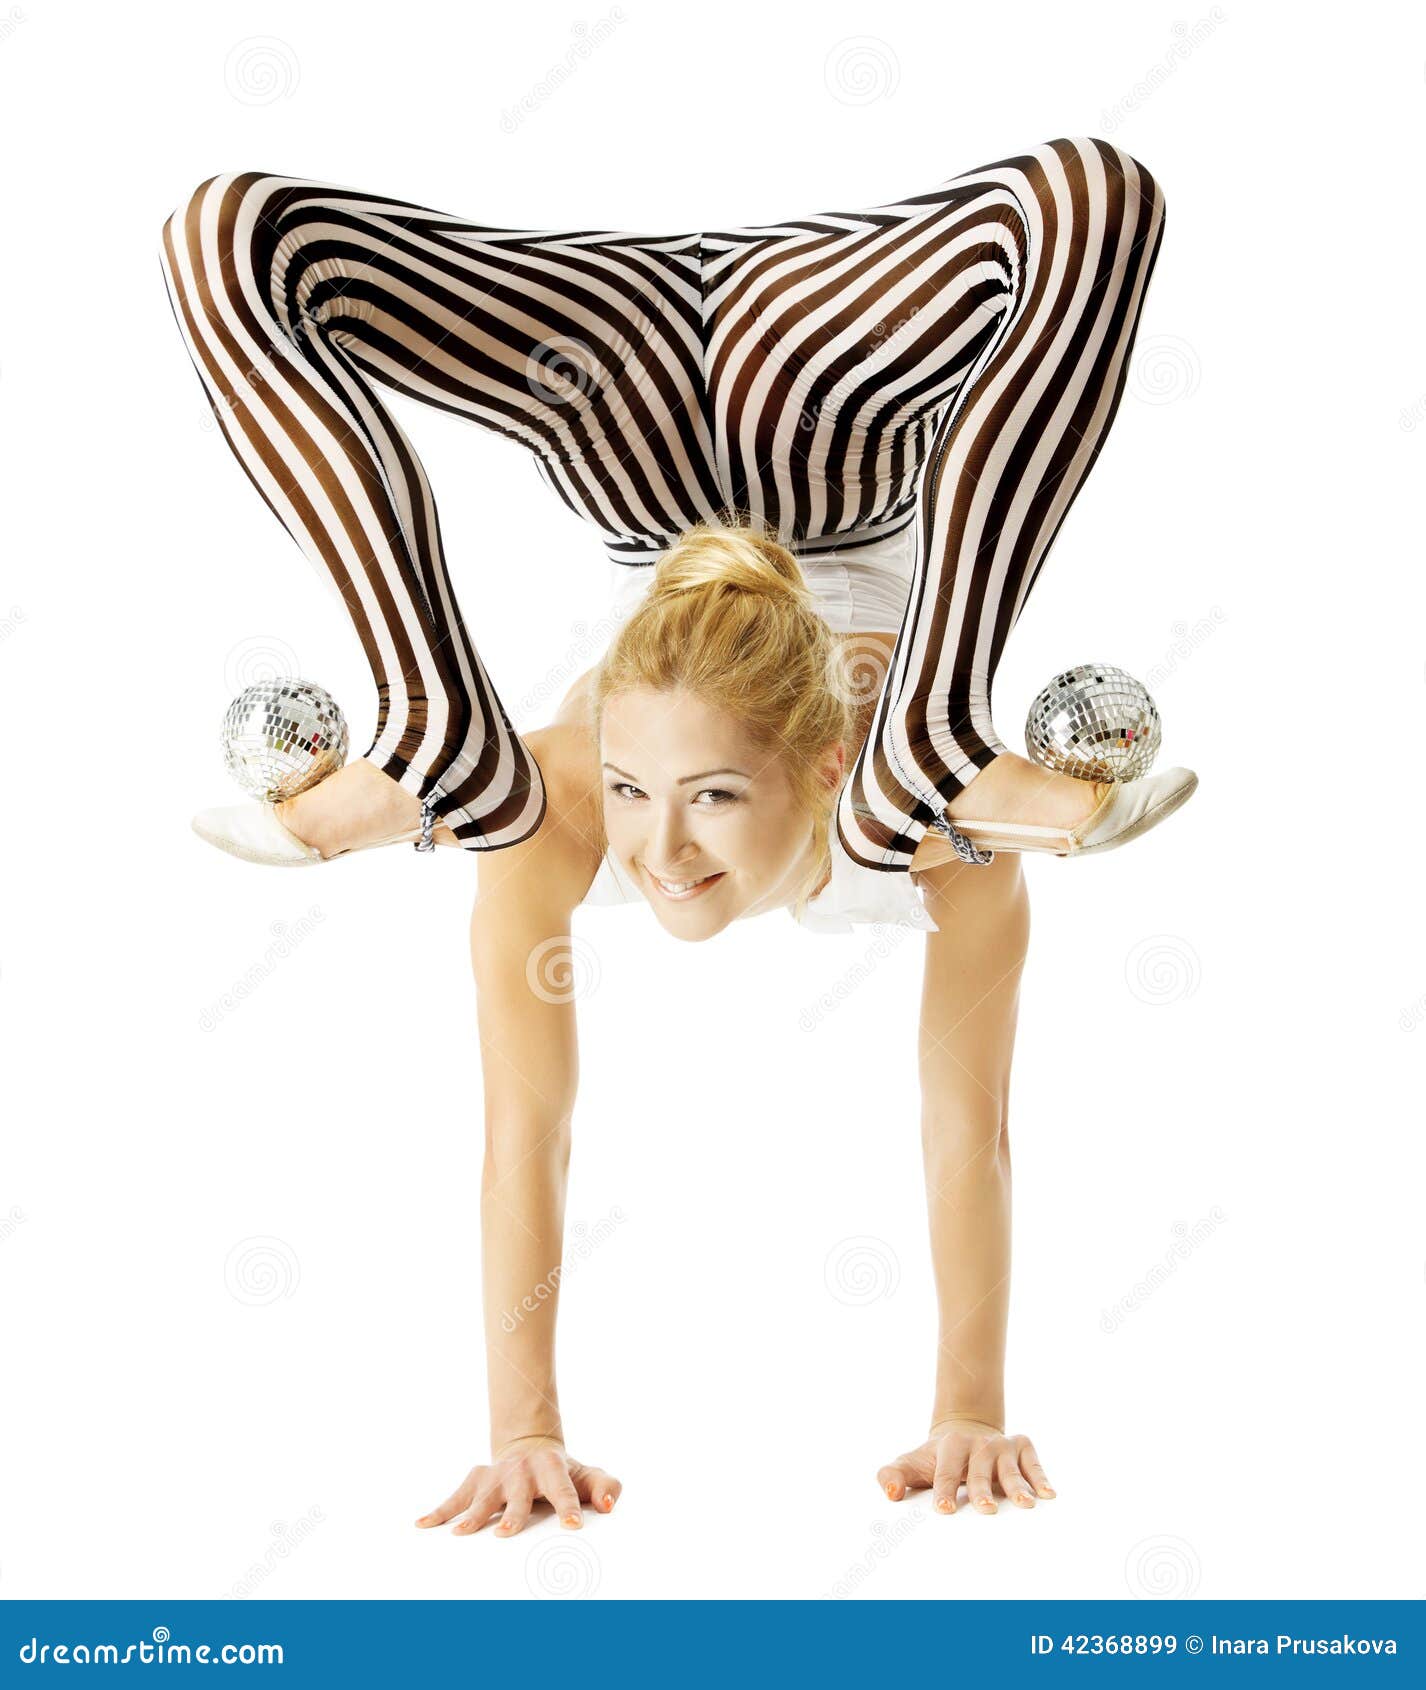 https://thumbs.dreamstime.com/z/circus-gymnast-woman-flexible-body-standing-arms-upside-down-balancing-balls-feet-isolated-white-background-42368899.jpg